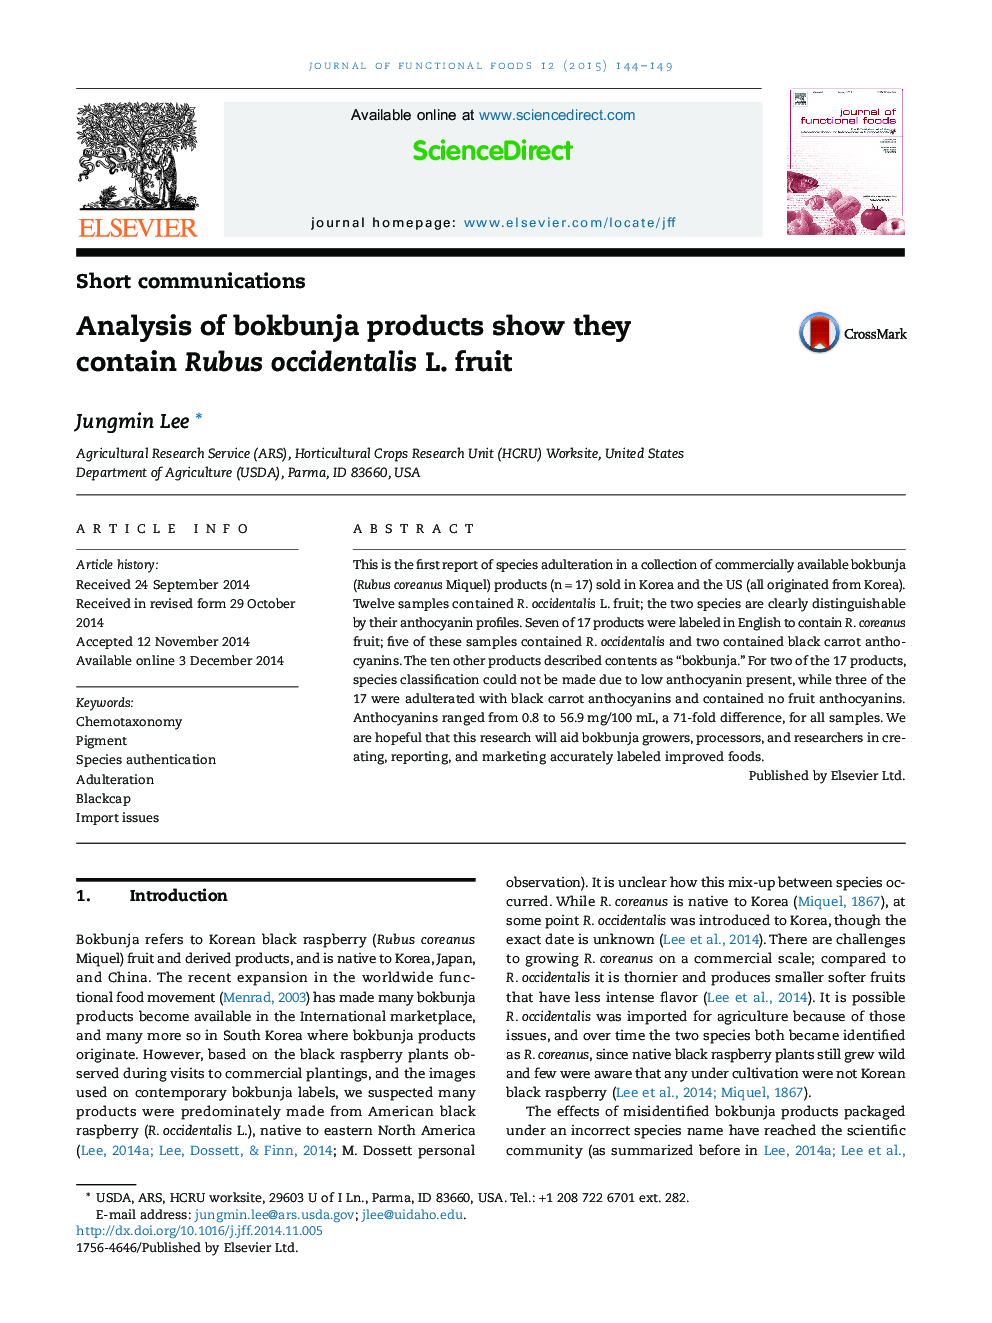 Analysis of bokbunja products show they contain Rubus occidentalis L. fruit